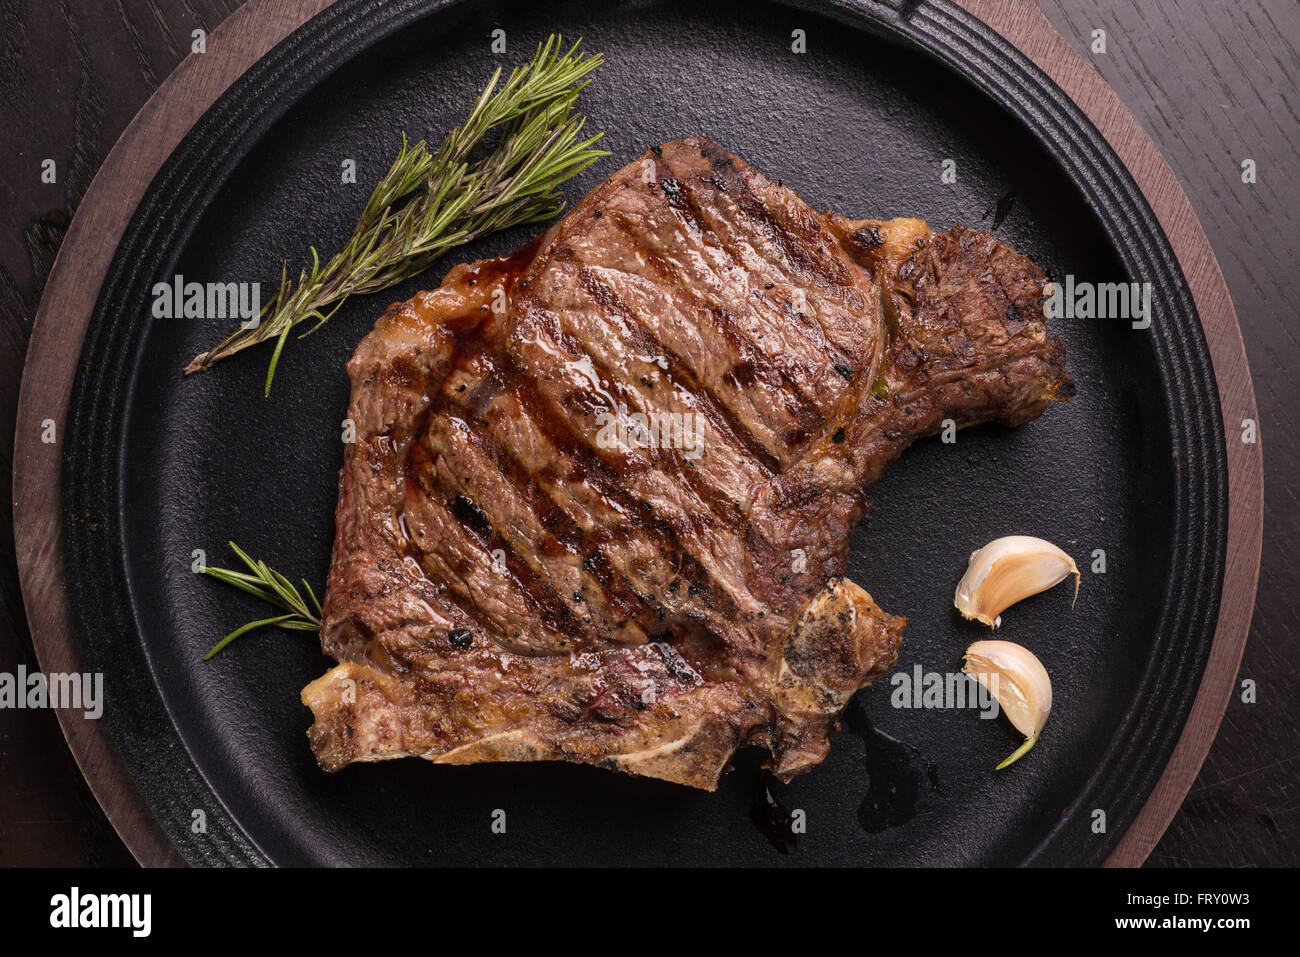 Top view of grilled rare rib steak Stock Photo